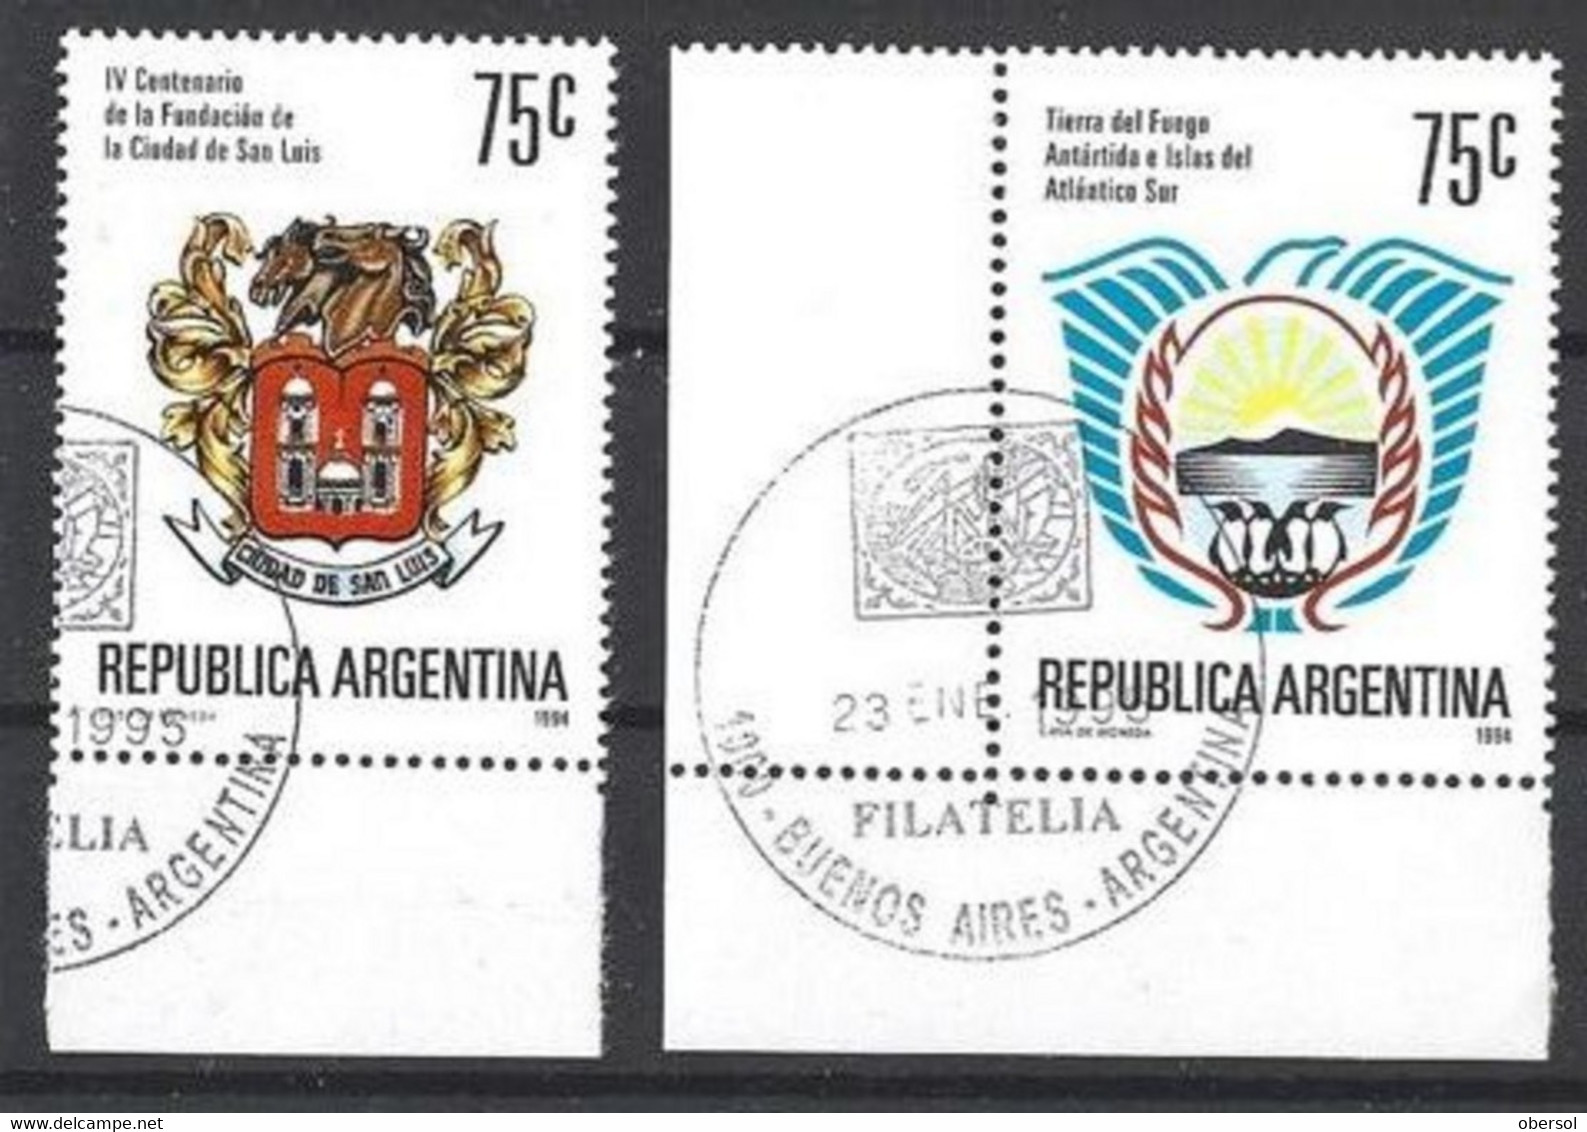 Argentina 1994 San Luis And Tierra Del Fuego Shields Philatelic Cancel With Gum - Used Stamps